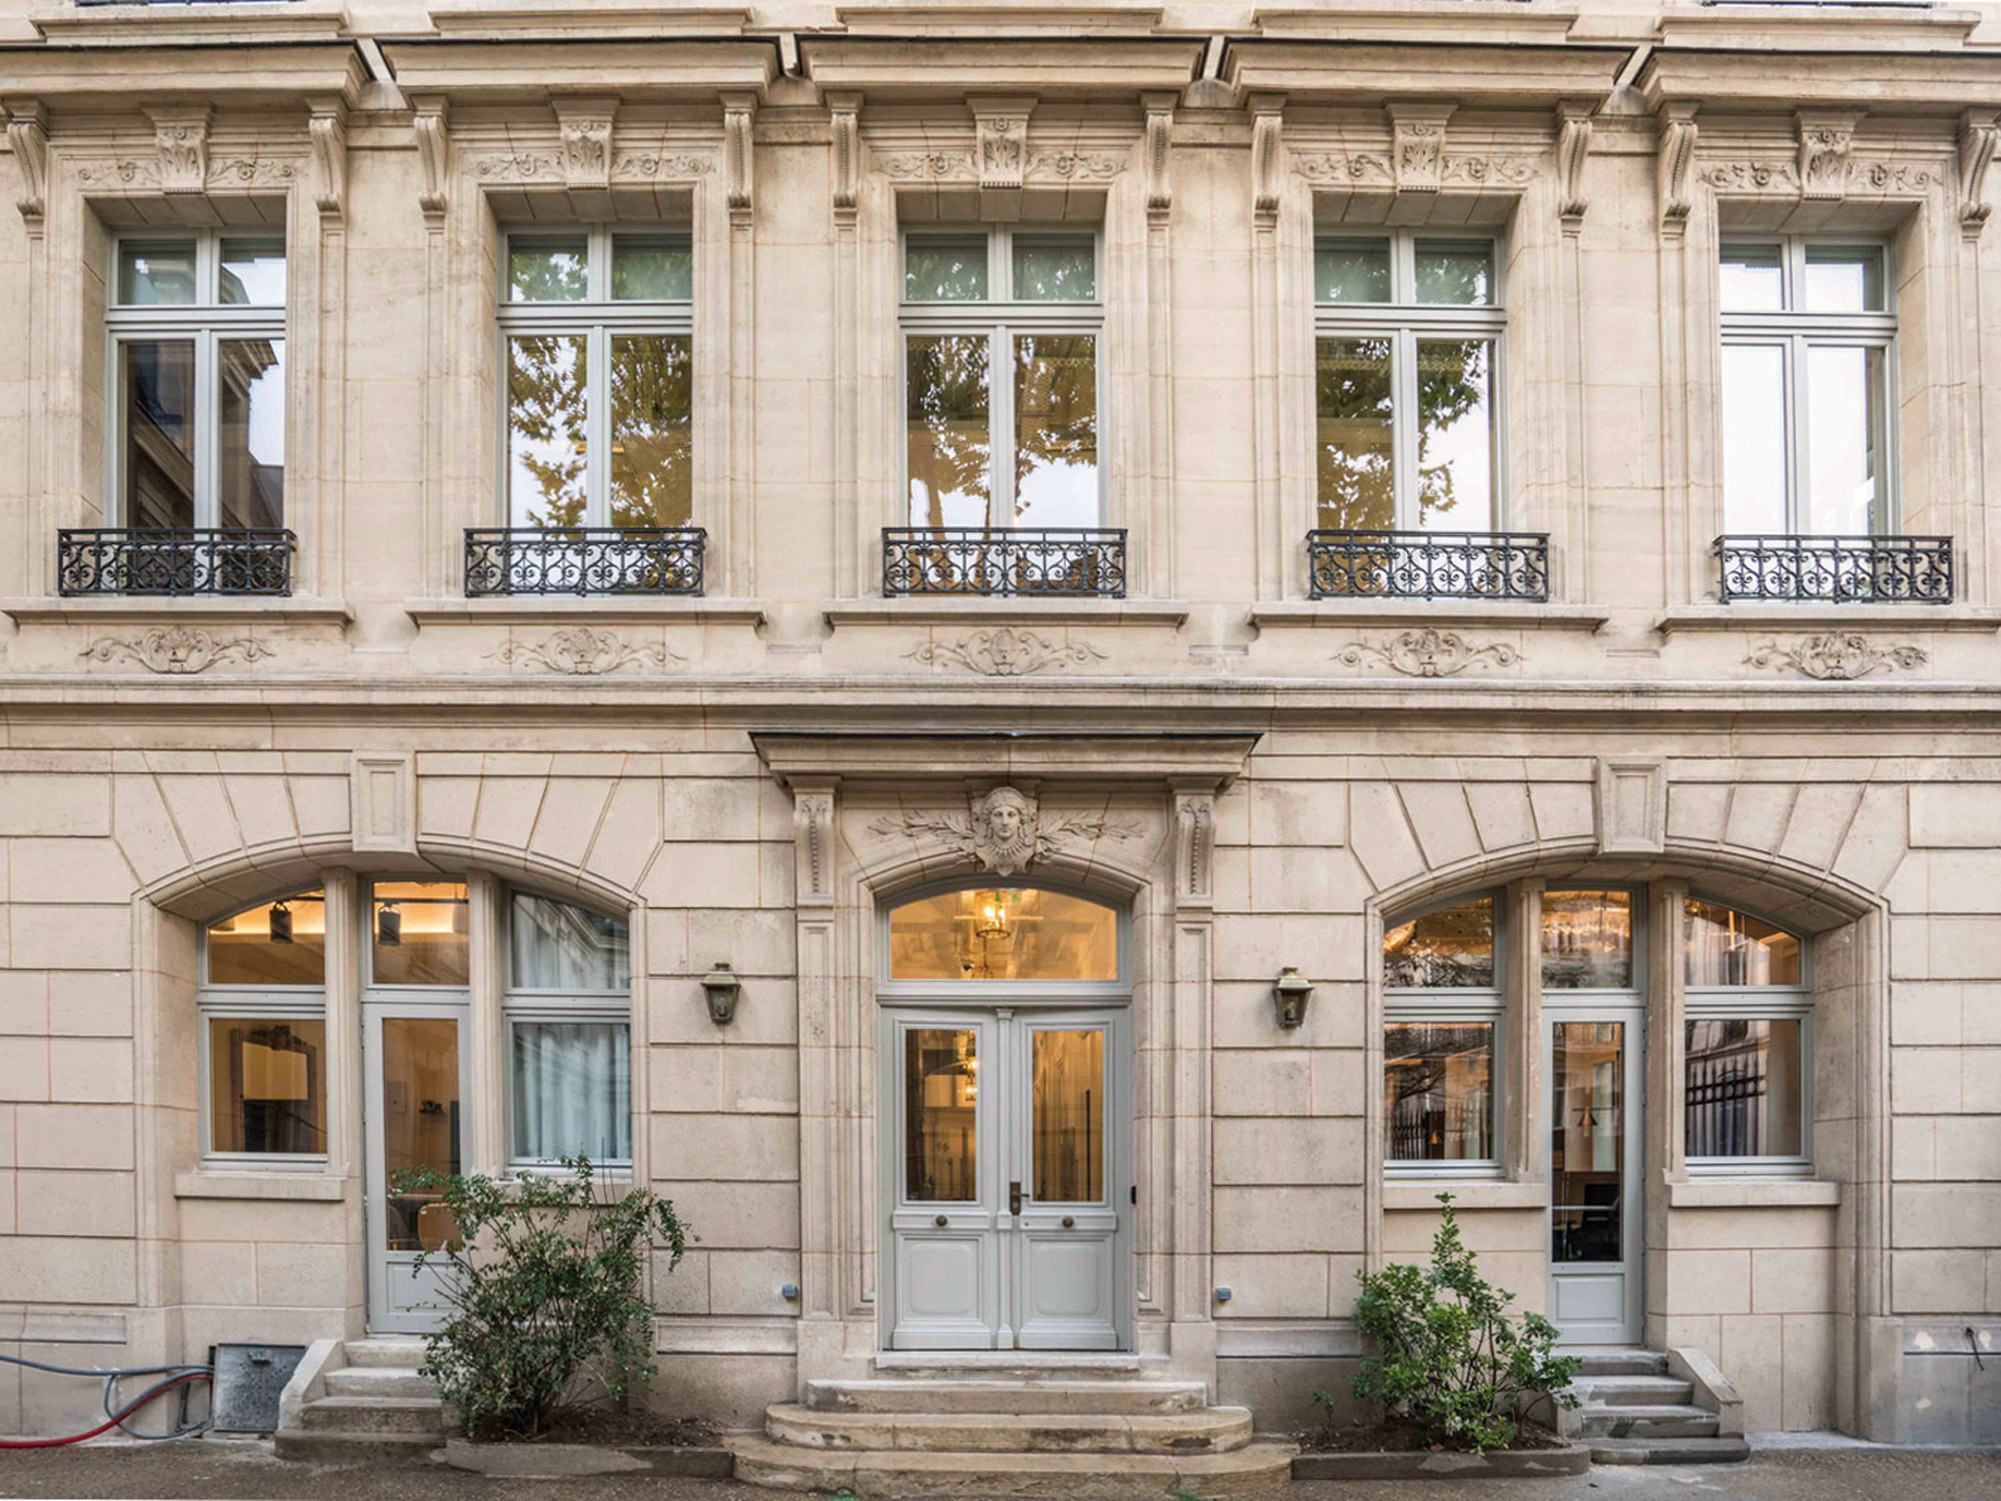 Classic French Beaux-Arts architecture features prominently with intricate stone facades, symmetrically balanced French windows, and wrought-iron balcony detailing flanking a central wooden door with transom window.